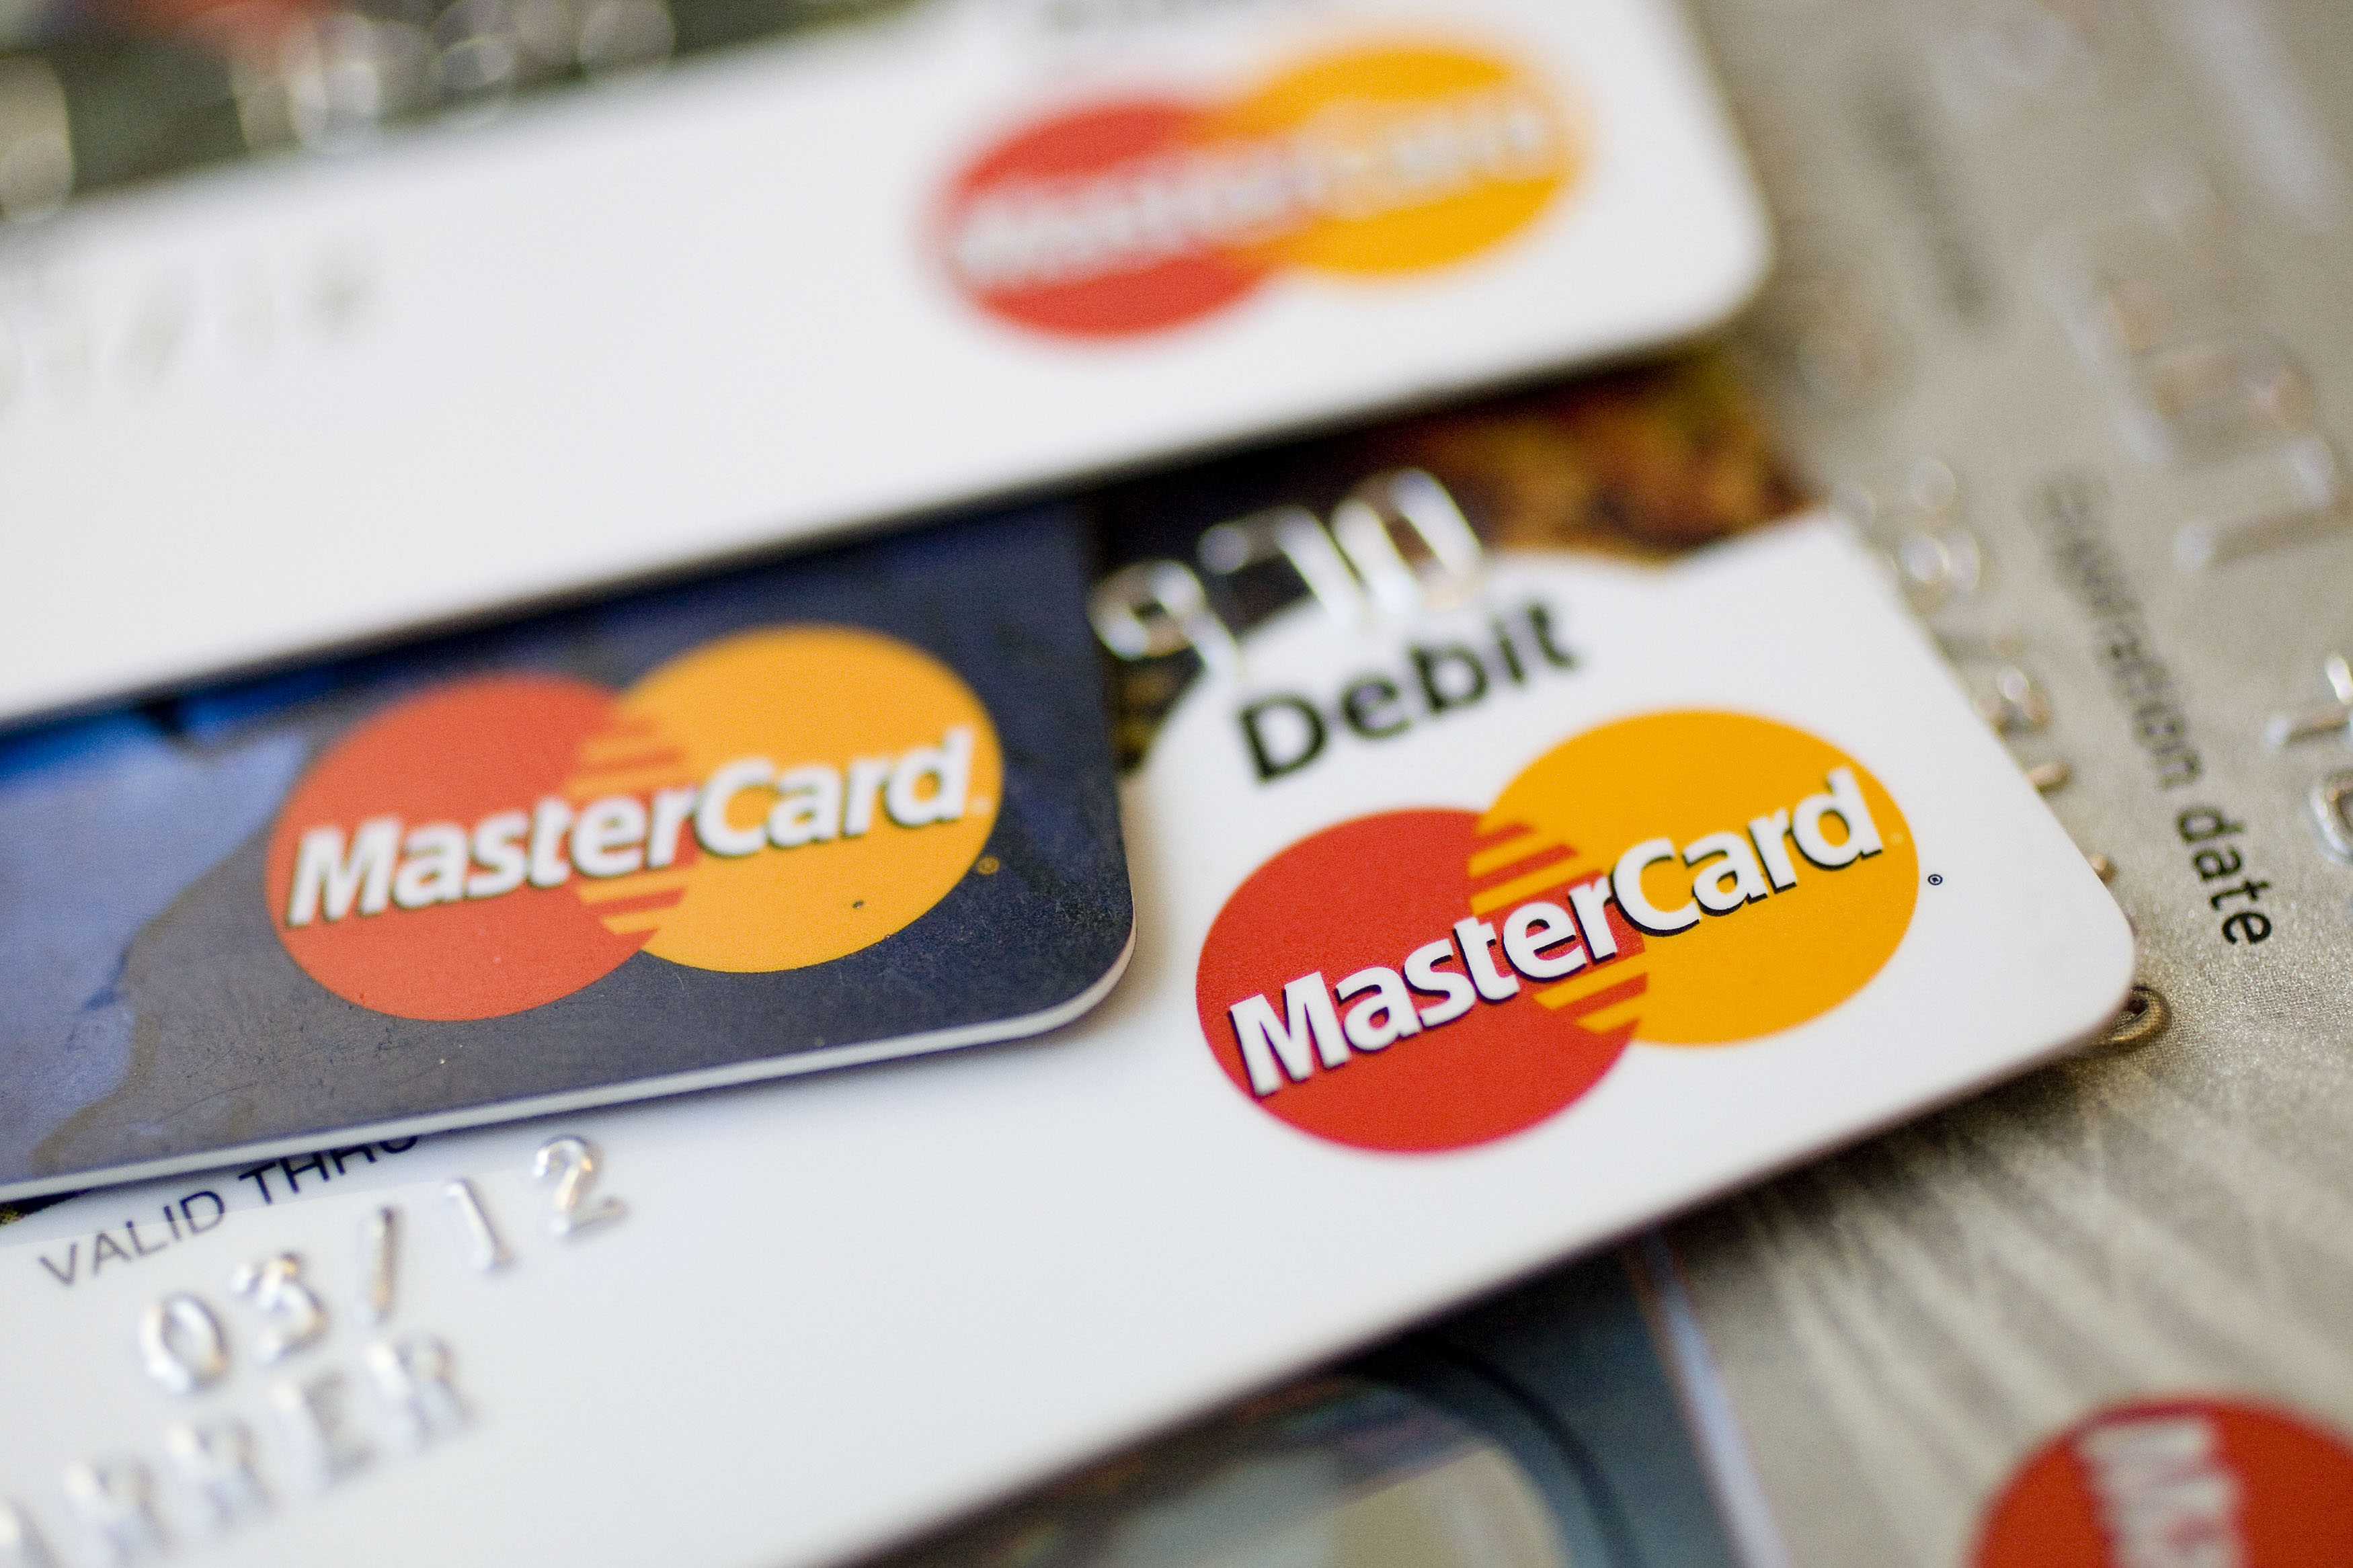 MasterCard logos appear on credit and debit cards arranged for a photograph in New York, U.S., on Thursday, July 30, 2009. (Andrew Harrer—Bloomberg/Getty Images)